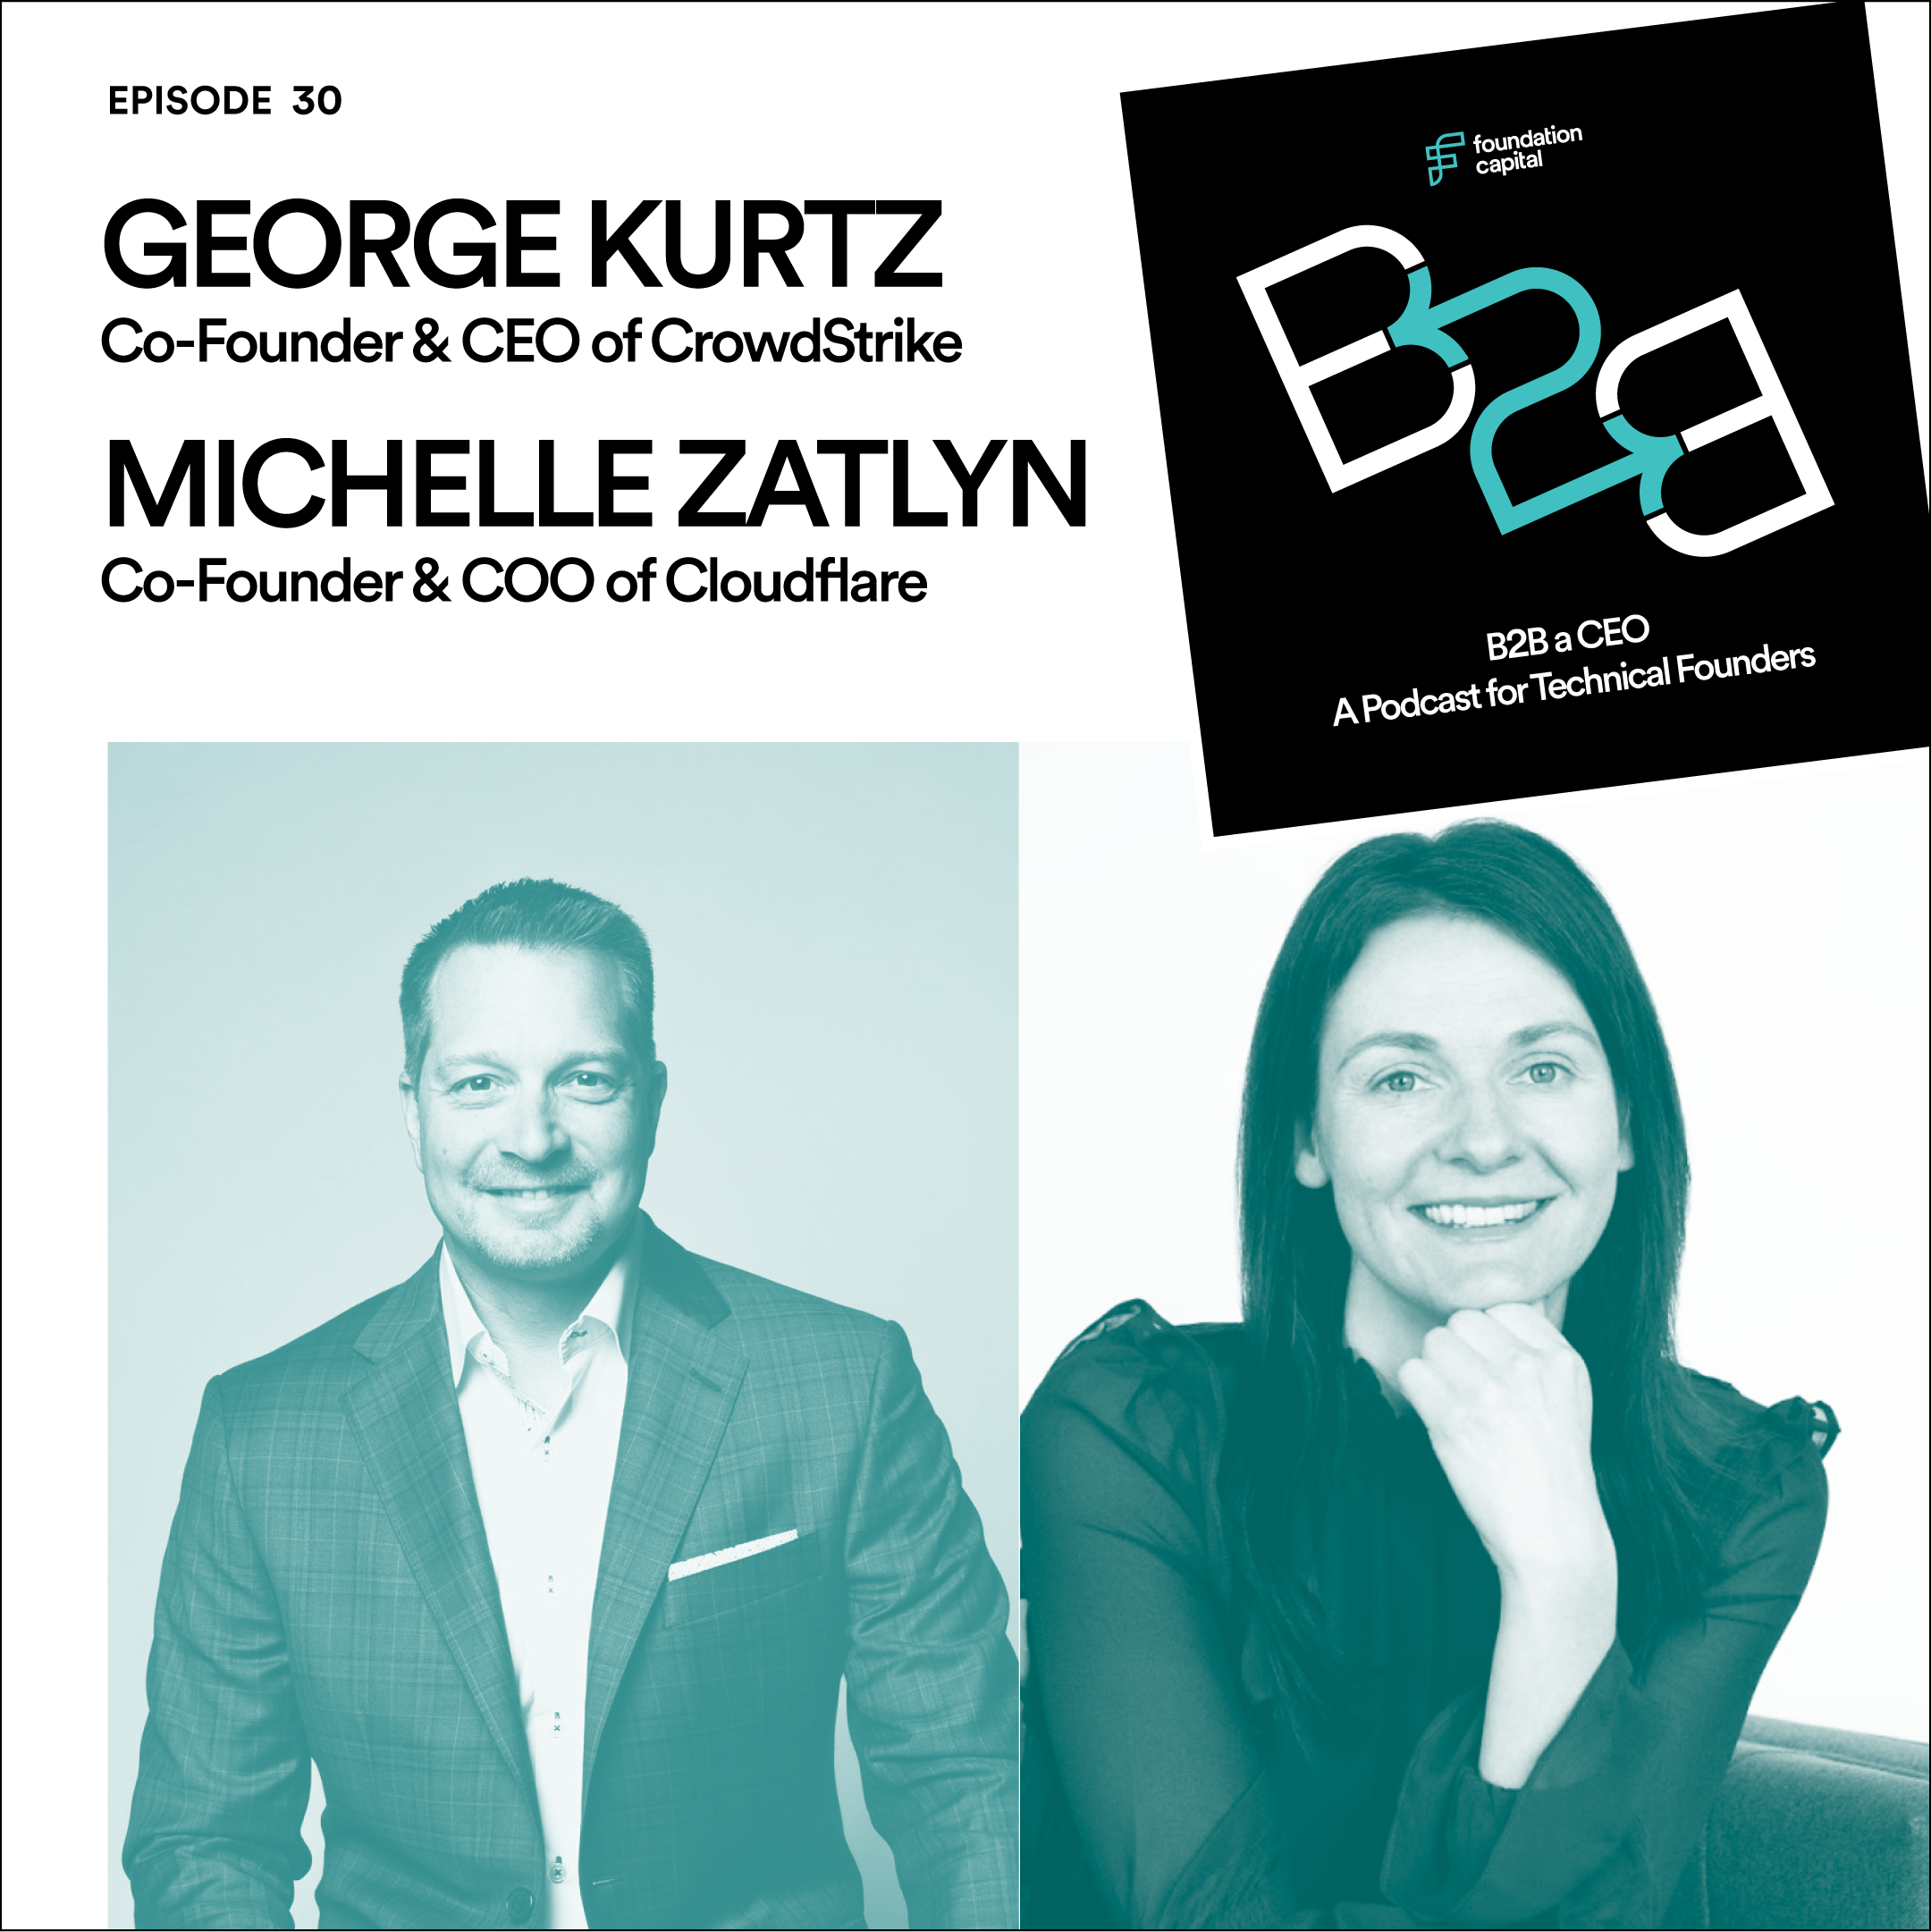 george kurtz, co founder and ceo of crowdstrike and michelle zatlyn co founder and coo of cloudflare